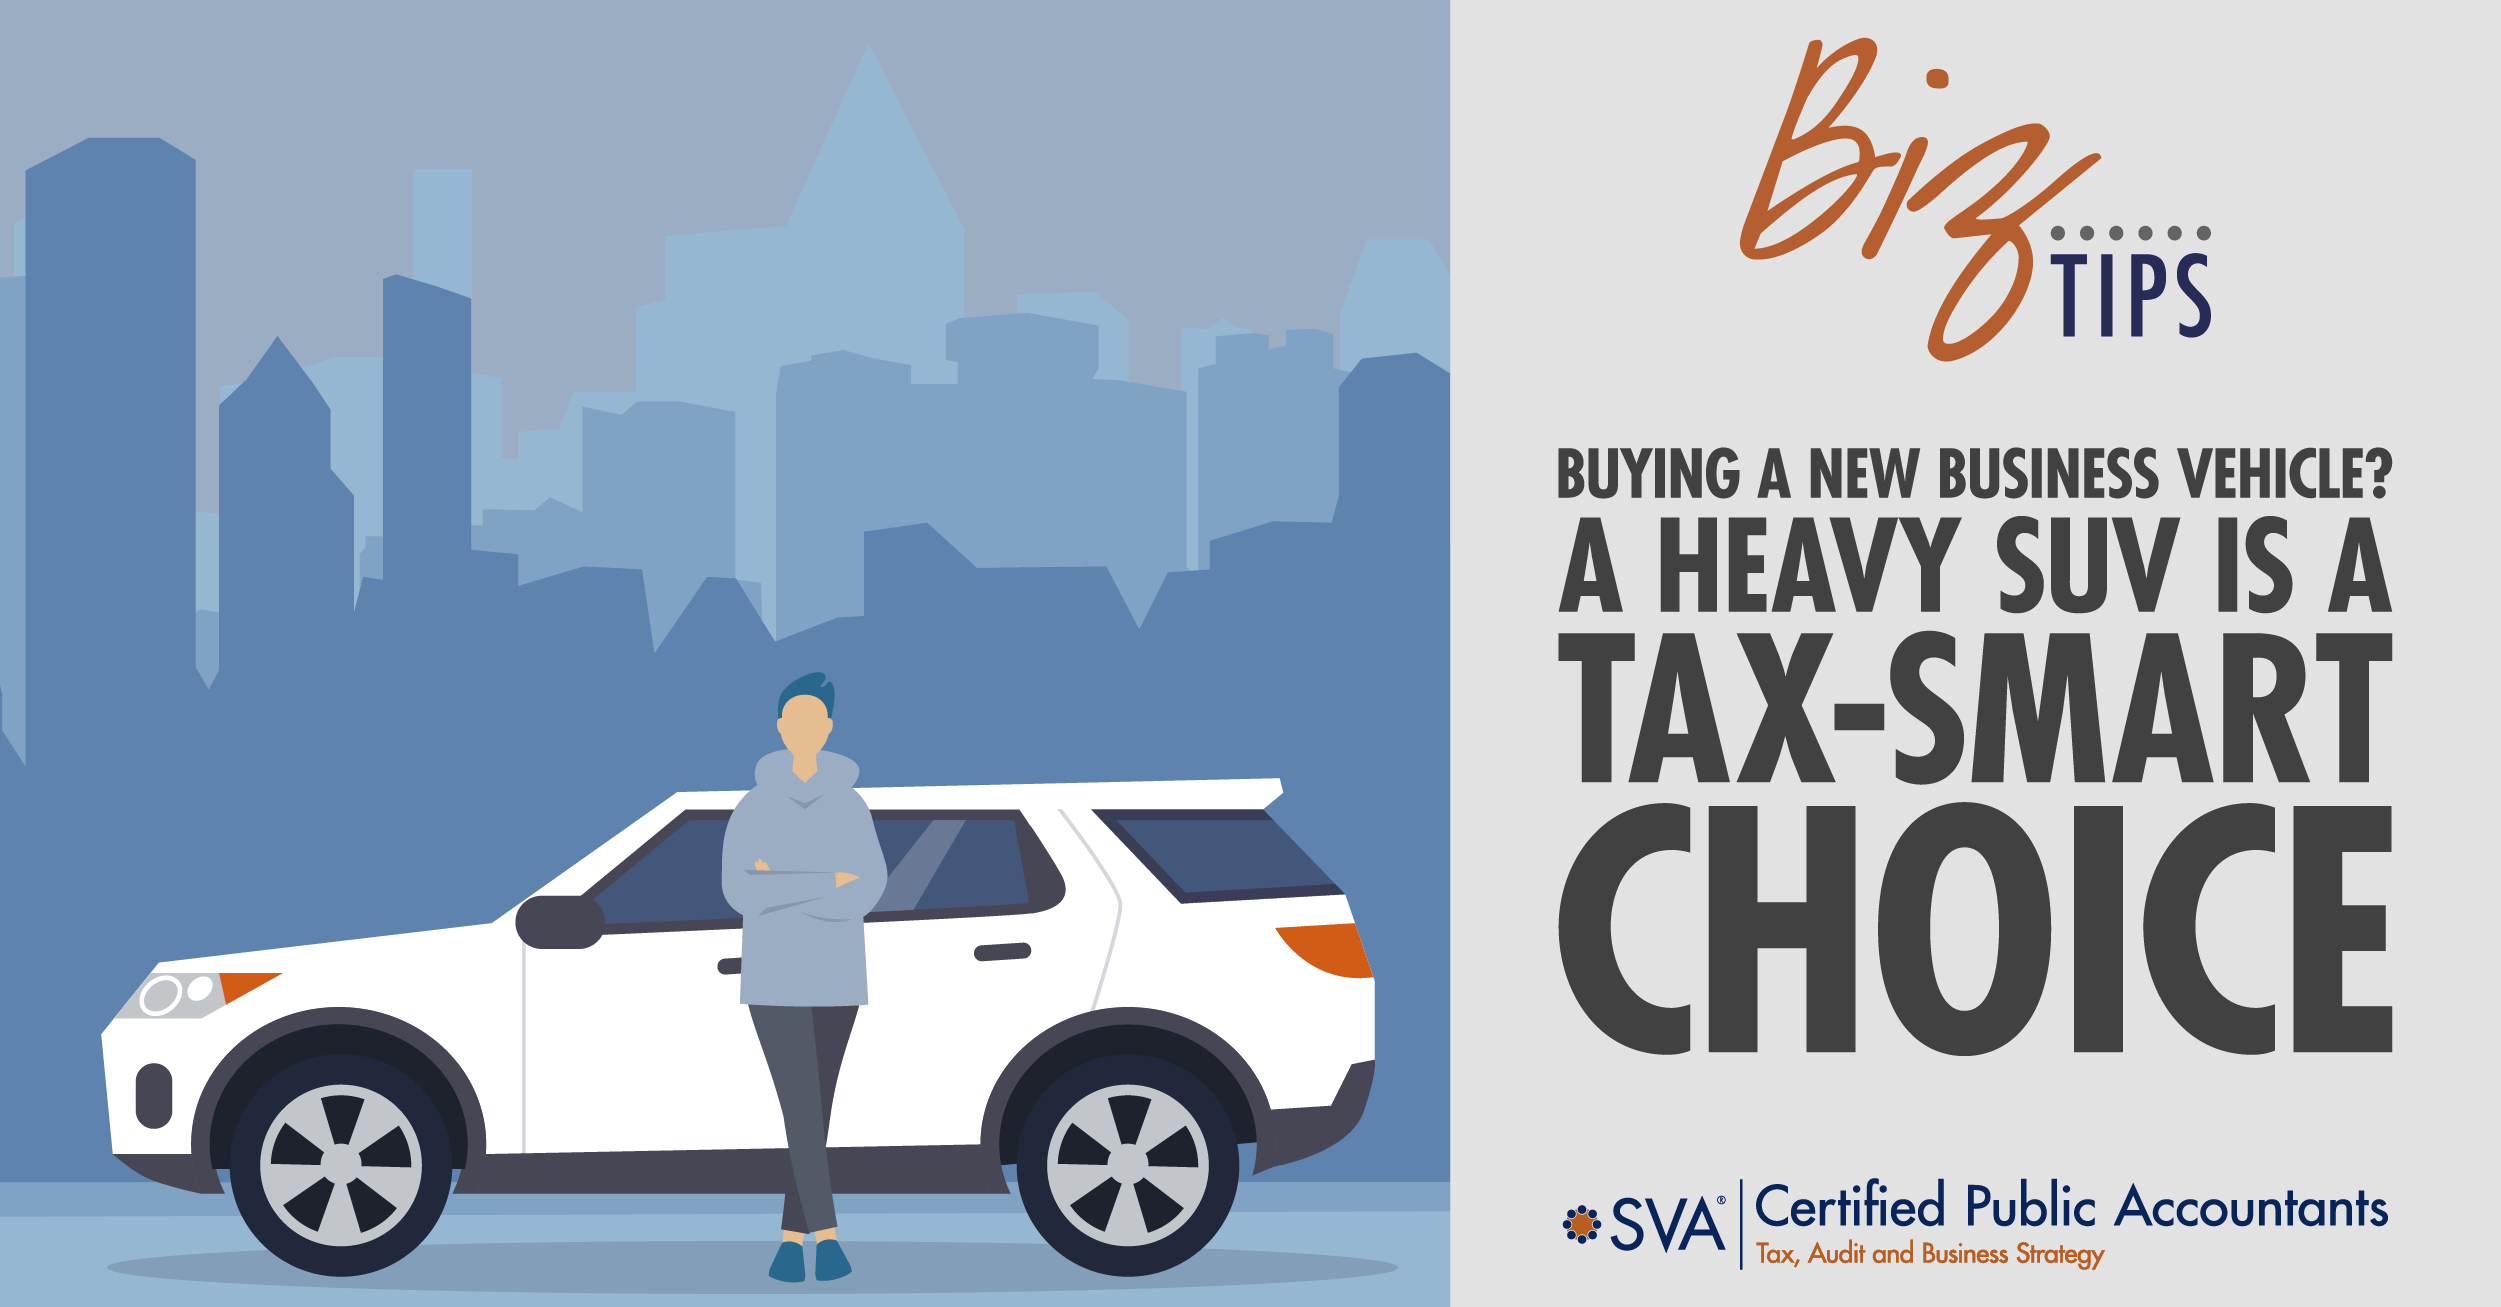 Buying a New Business Vehicle? A Heavy SUV is a Tax-Smart Choice